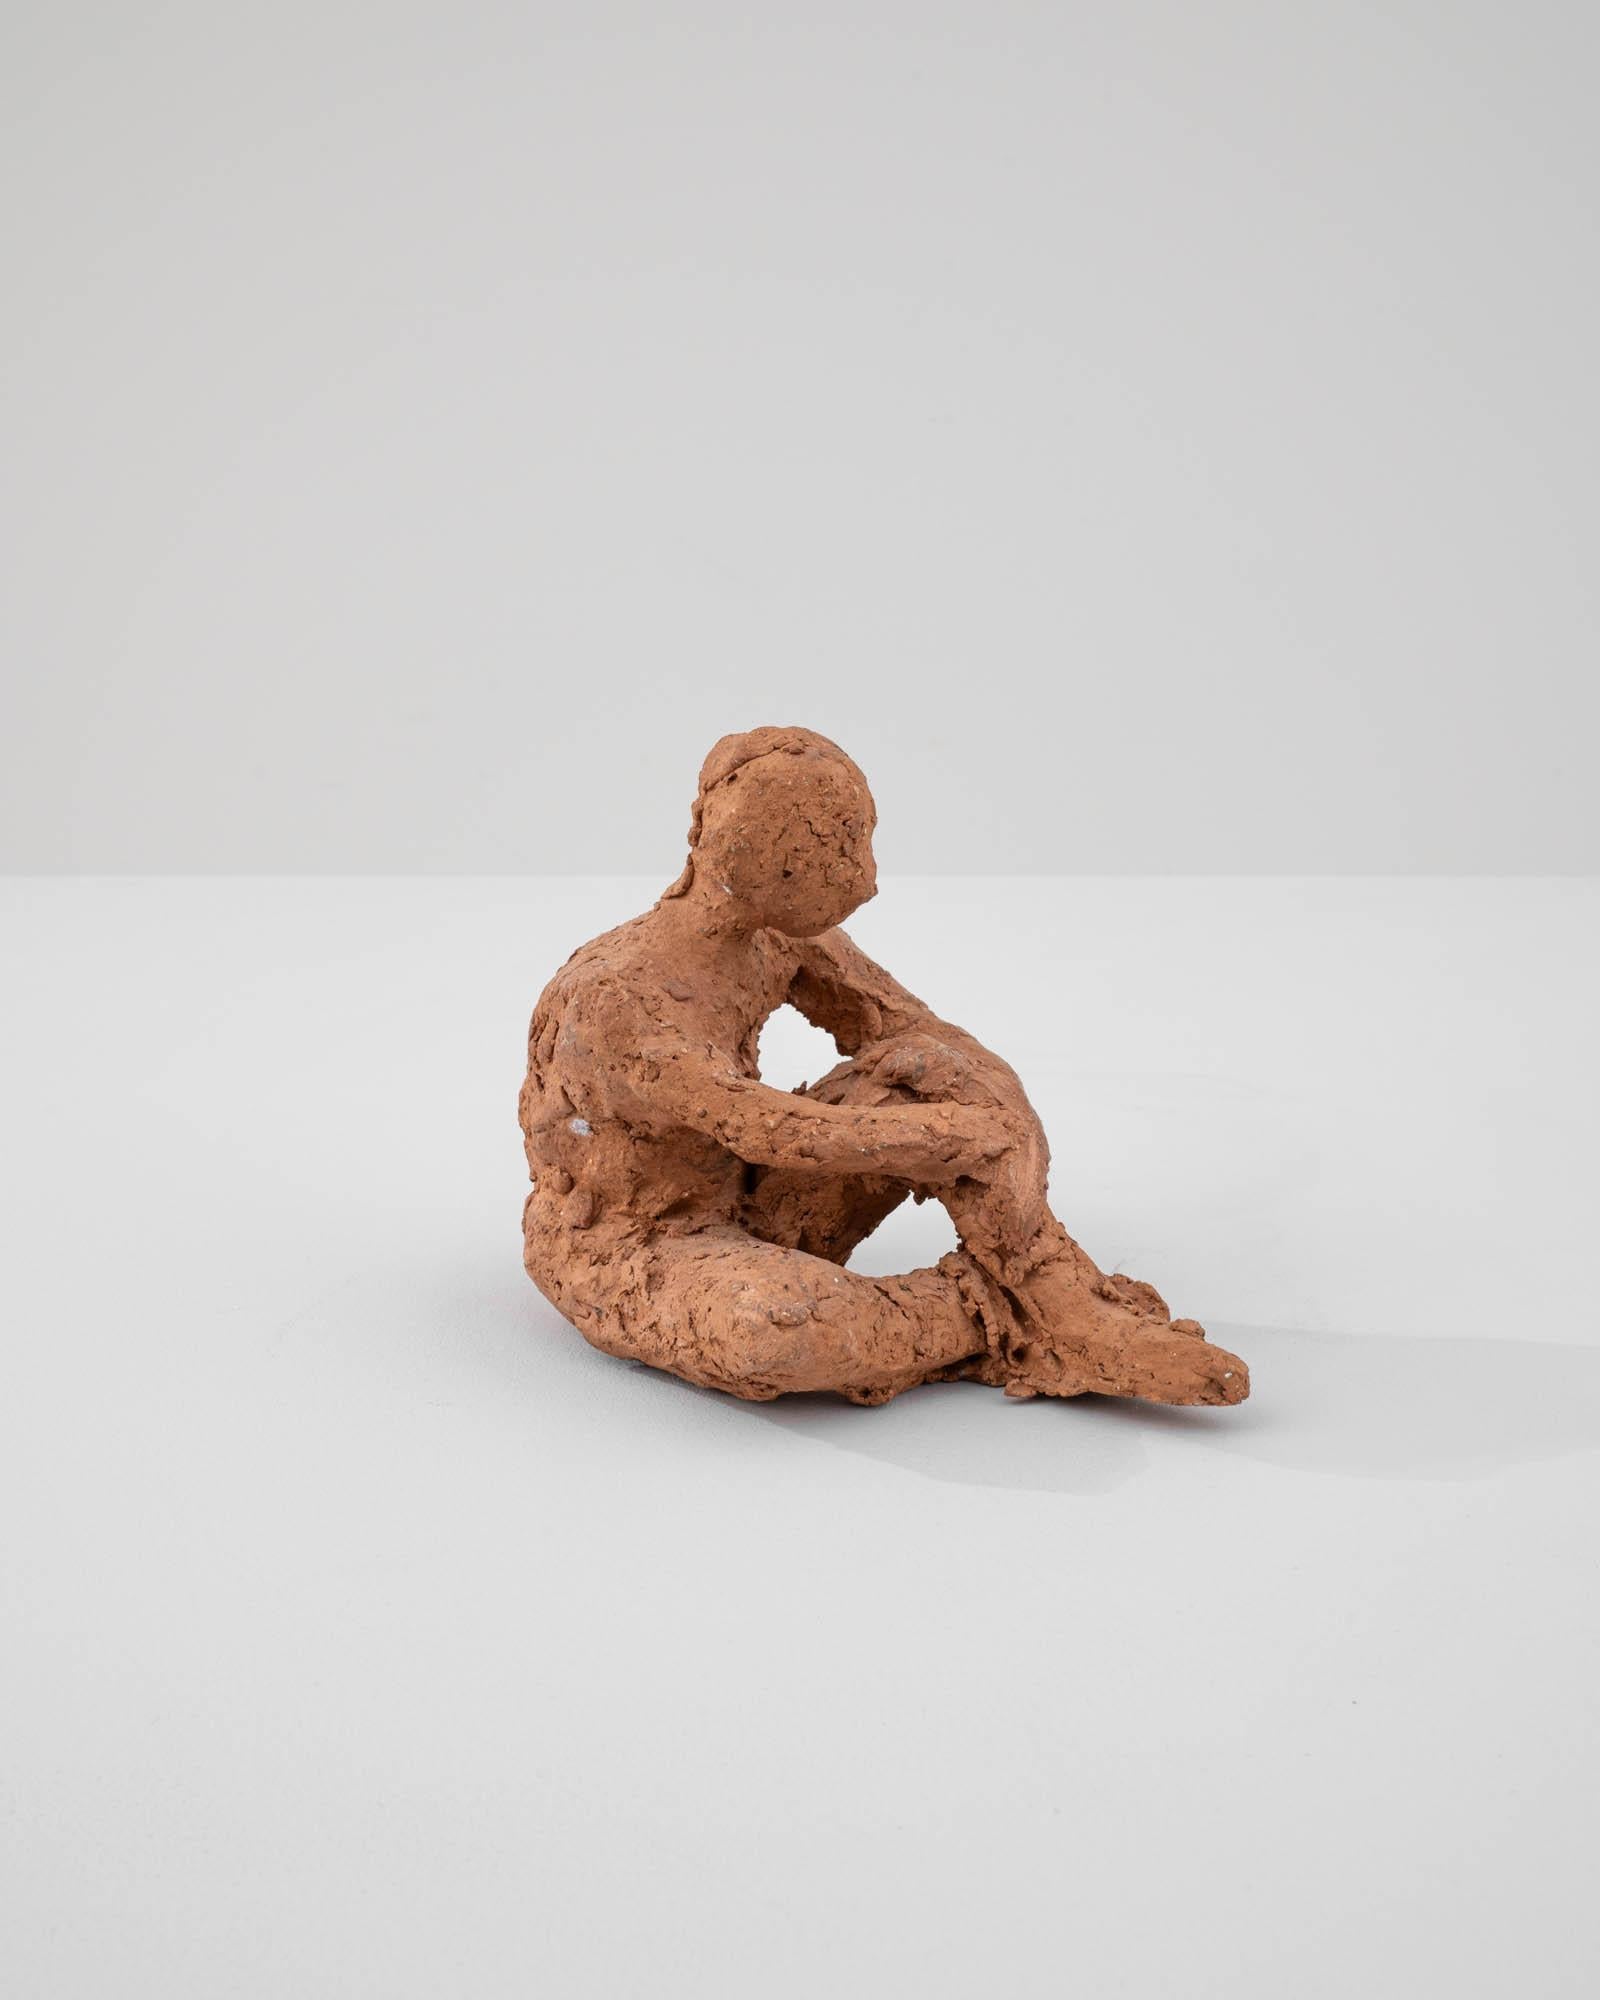 This contemplative 20th Century French Terracotta Sculpture invites a pause for reflection, capturing a solitary figure in a moment of introspection. The rough, unrefined texture of the terracotta gives the piece an organic, almost primal presence,